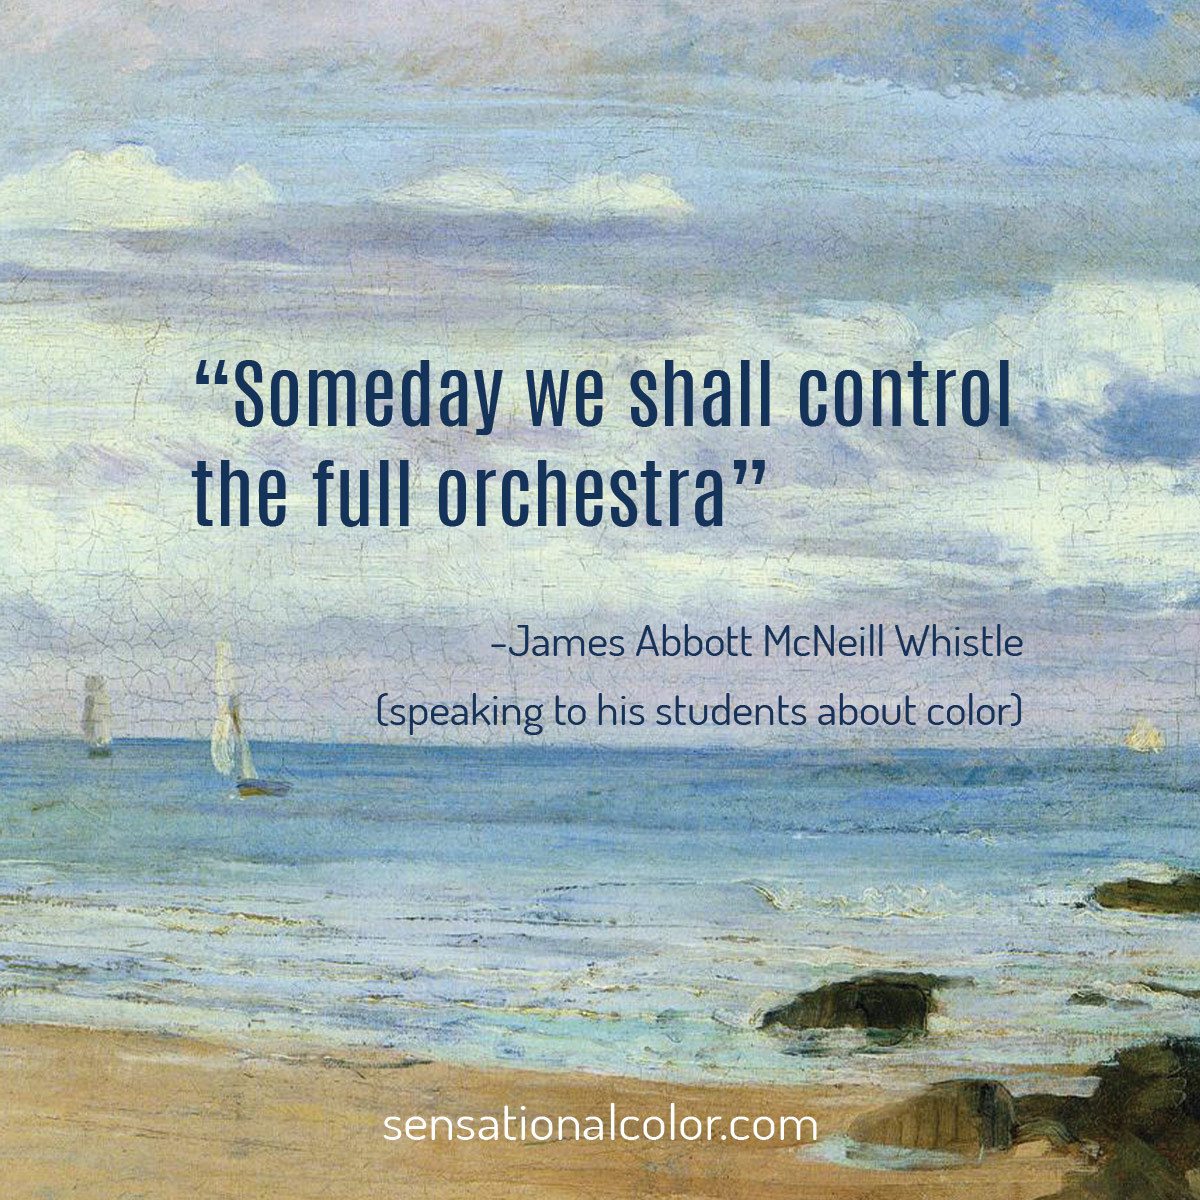 “Someday we shall control the full orchestra.” - James Abbott McNeill Whistler